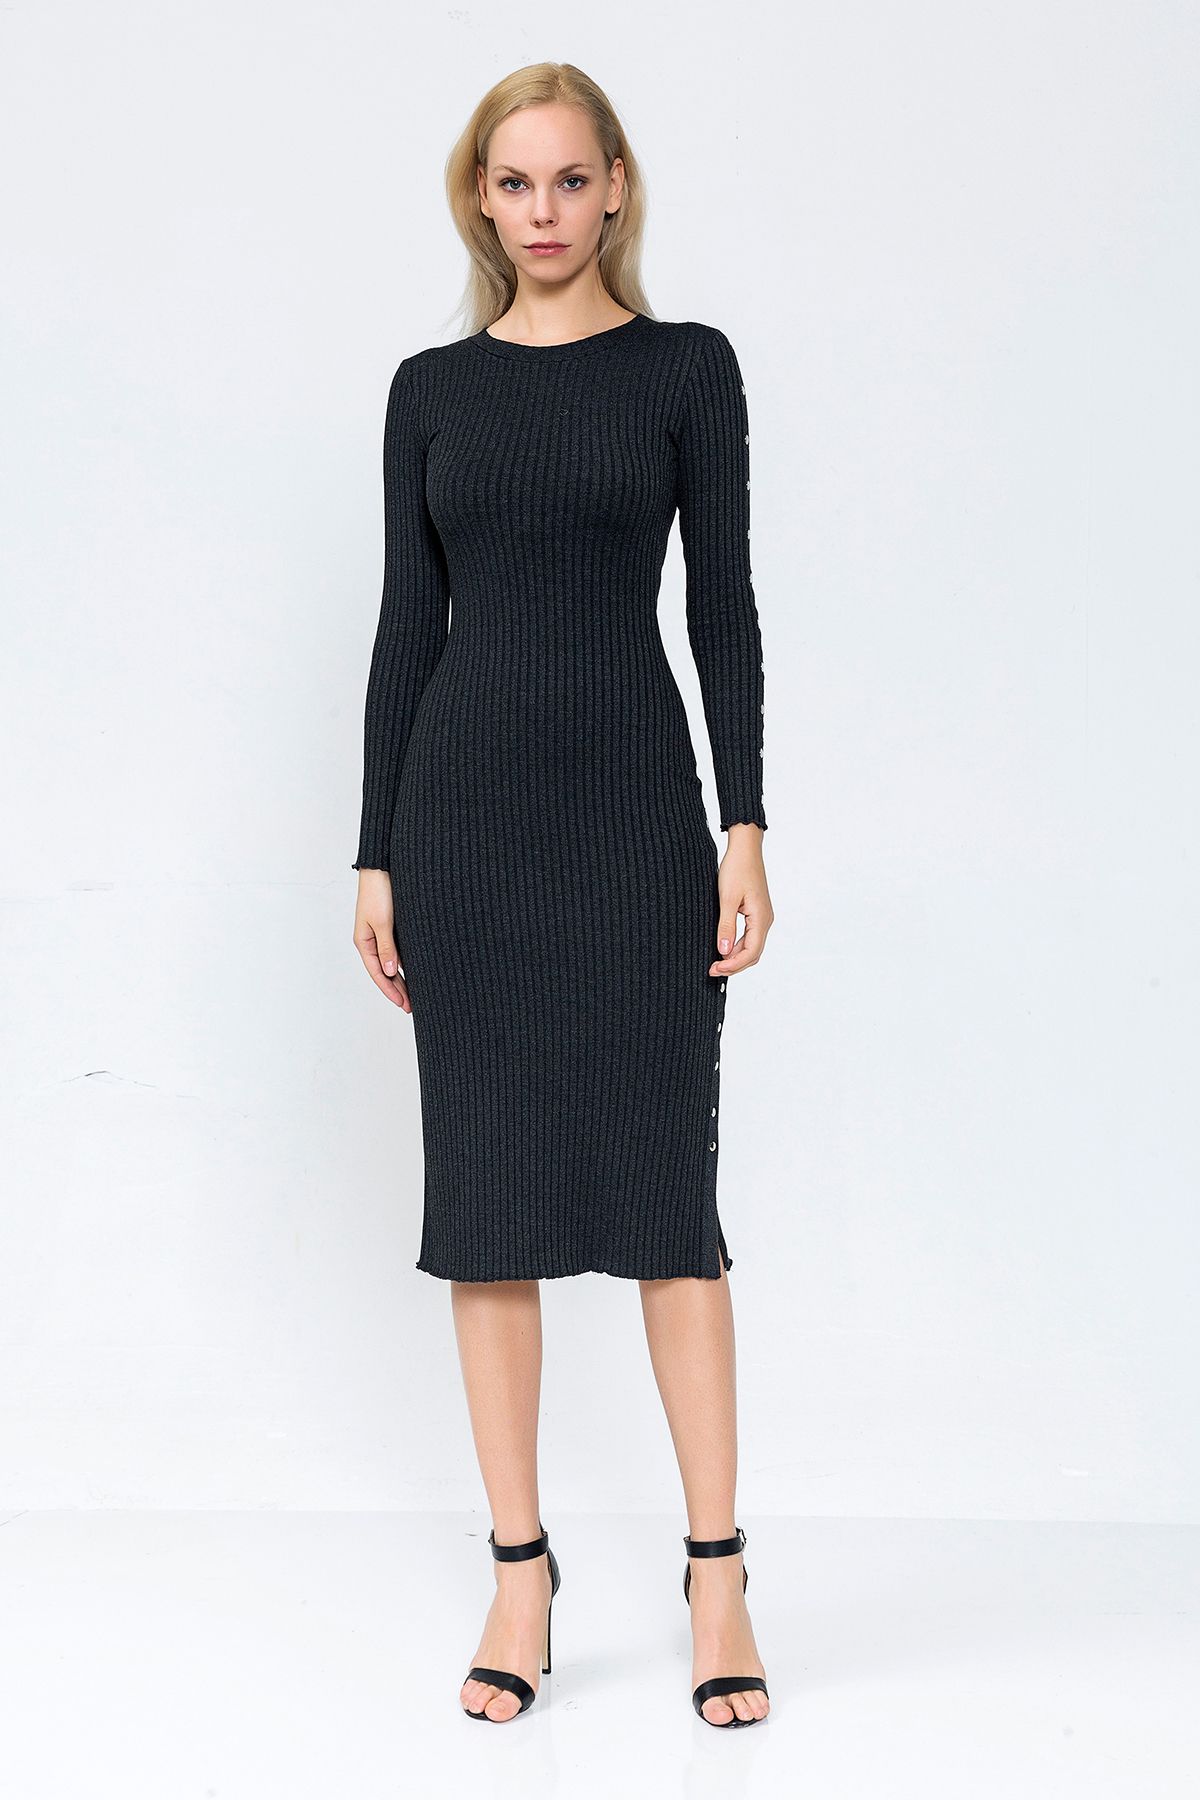 Picture of the sides Snap Knitwear Dress